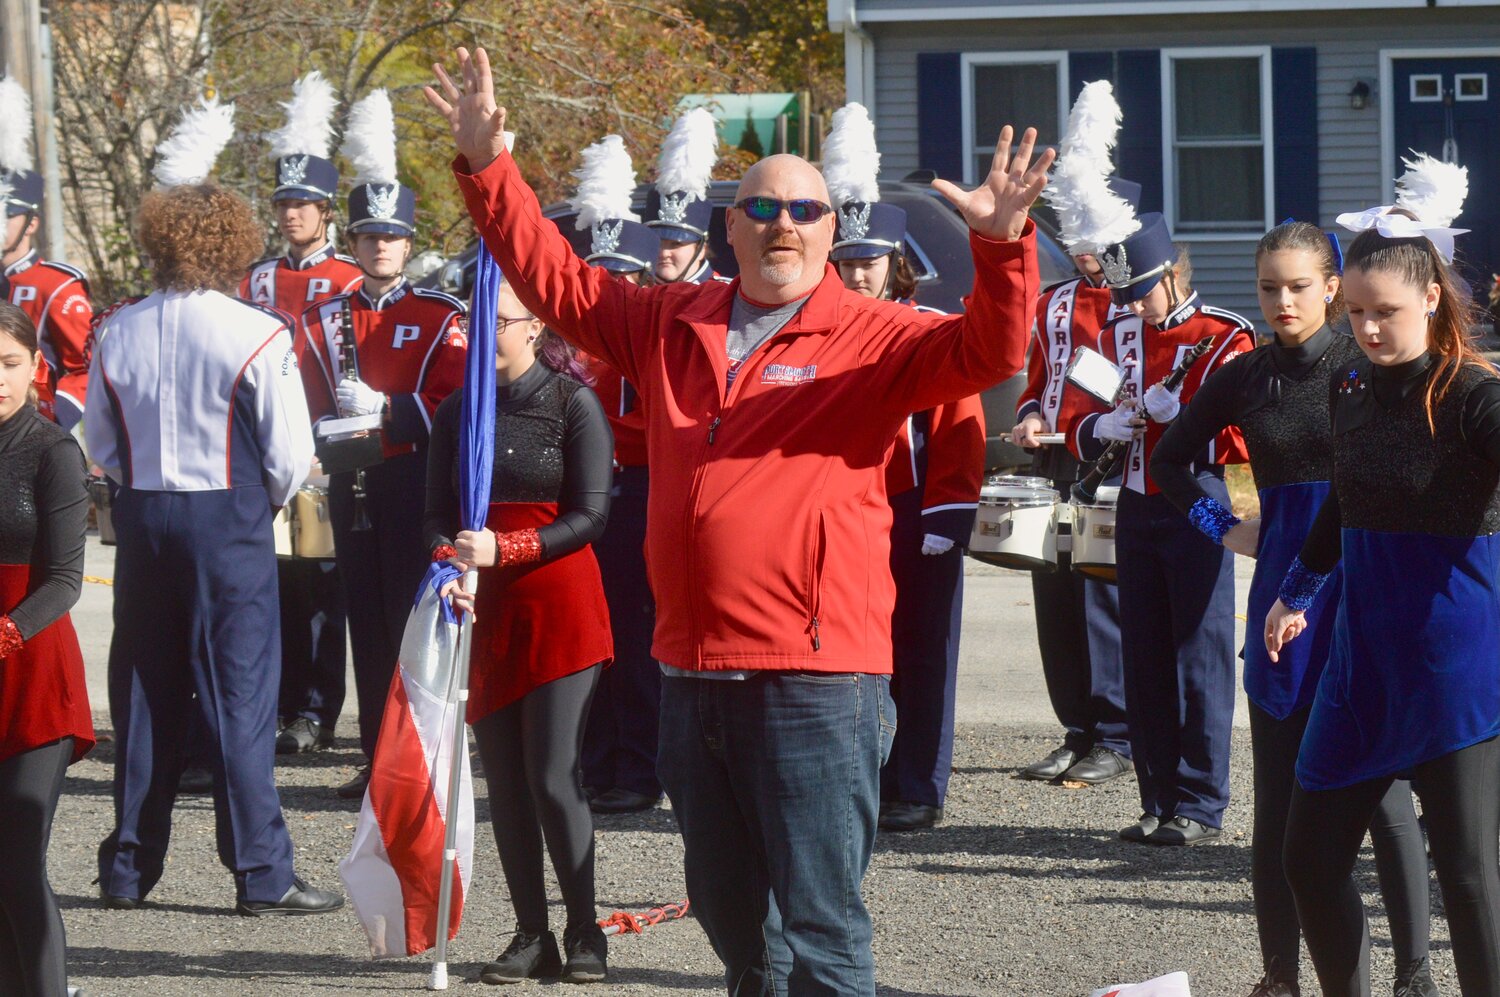 Portsmouth High School Band Director Ted Rausch thanks veterans for their service while introducing the marching band, which played a few numbers outside.